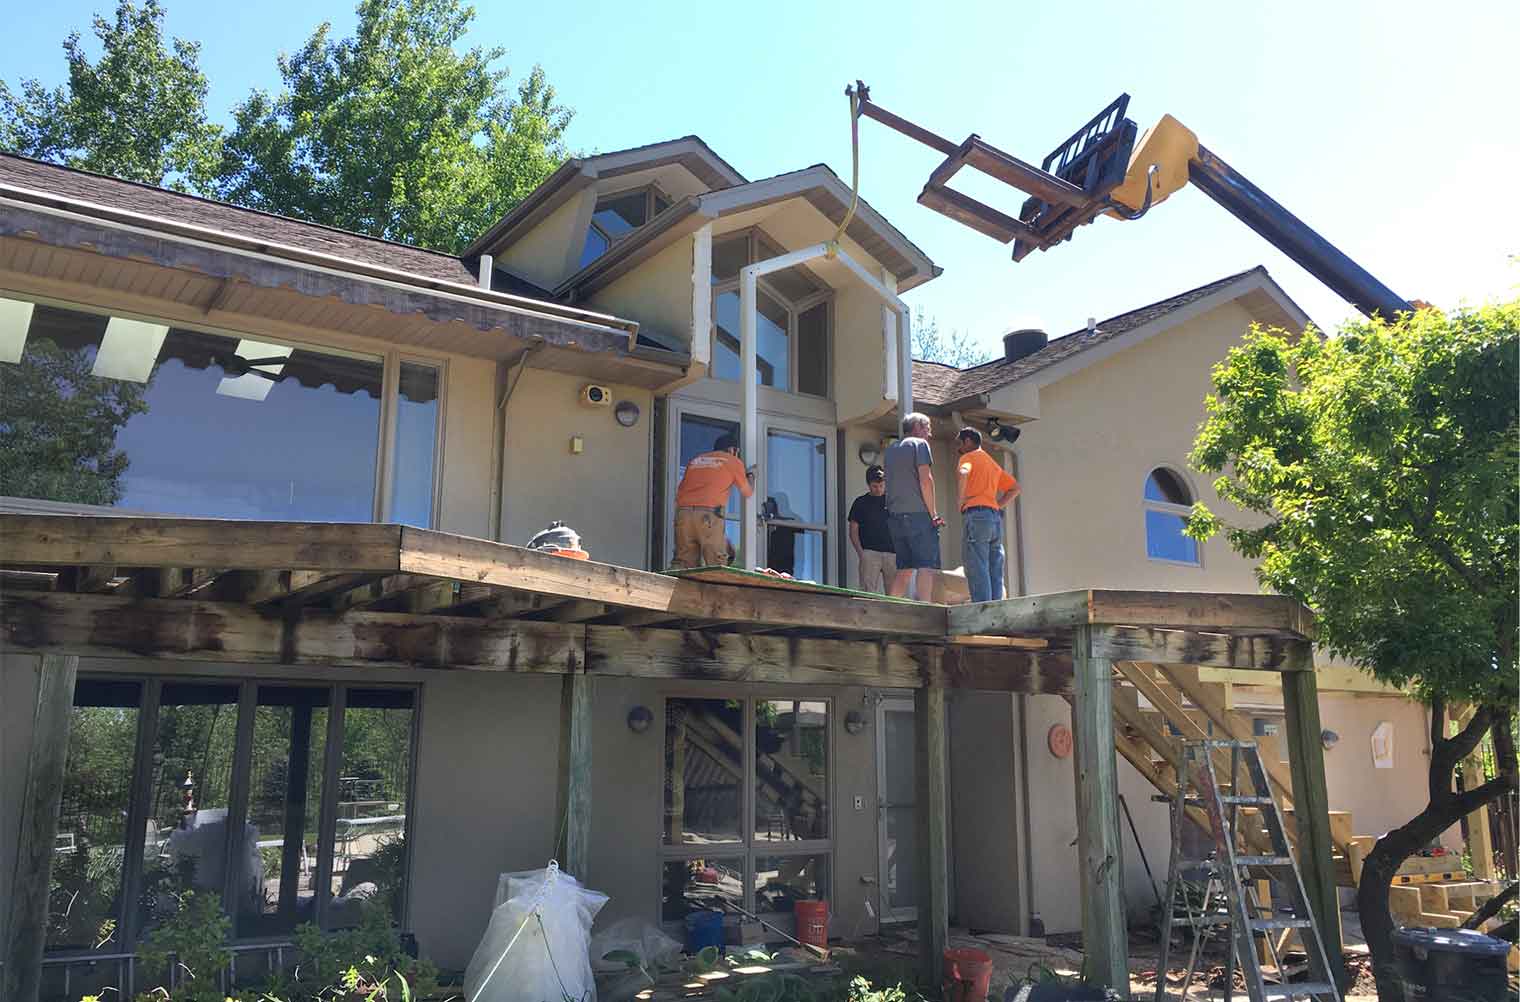 The first piece of metal armature for the new arbor on this rural Iowa deck designed and built by Silent Rivers of Des Moines is hoisted up with heavy equipment